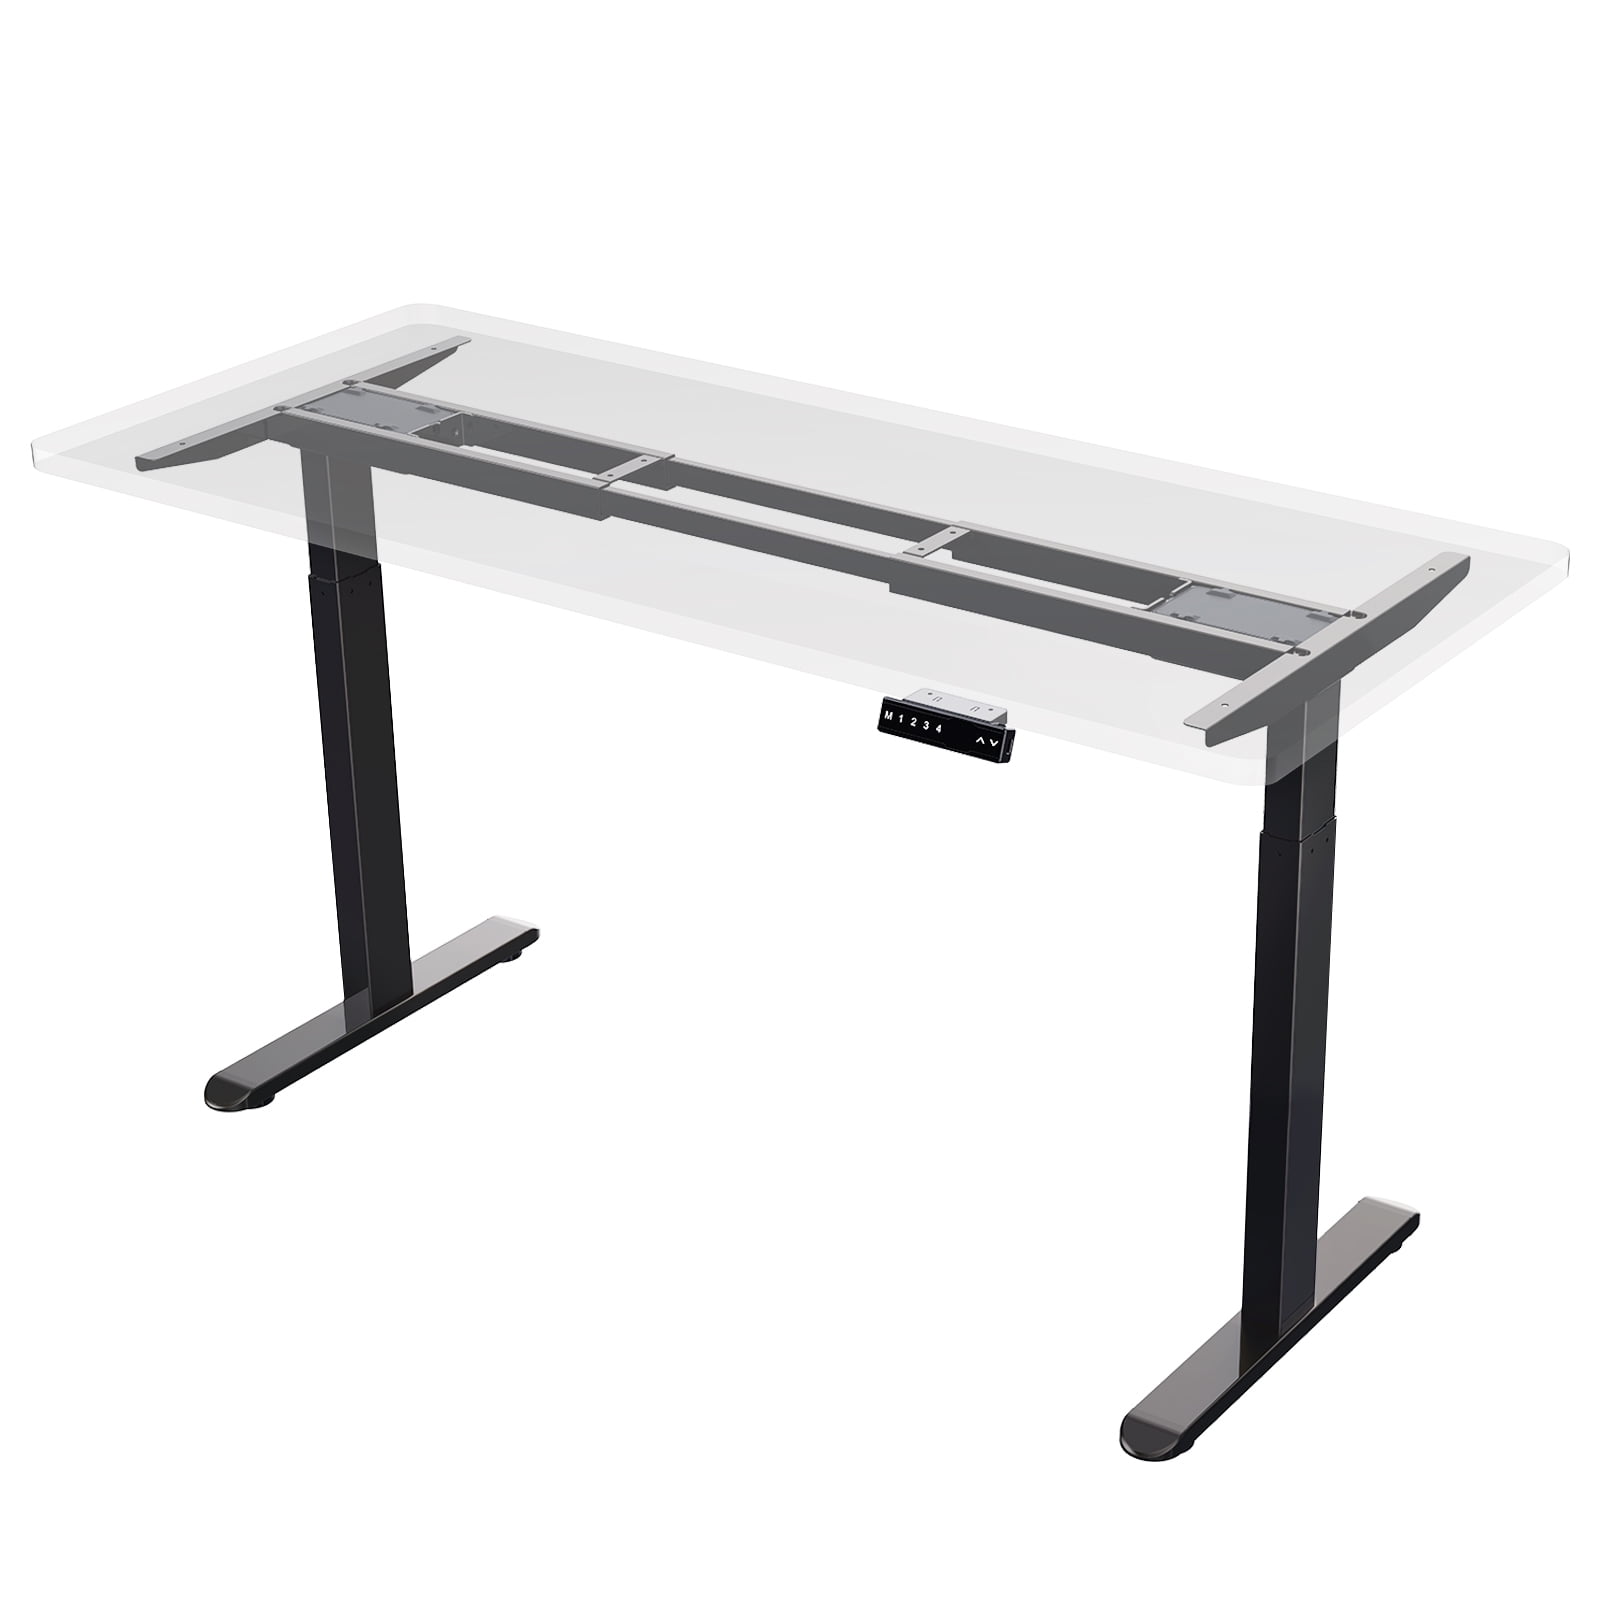 AIMEZO Electric Stand Up Desk Frame Height Adjustable Standing Desk Base W/O Top 